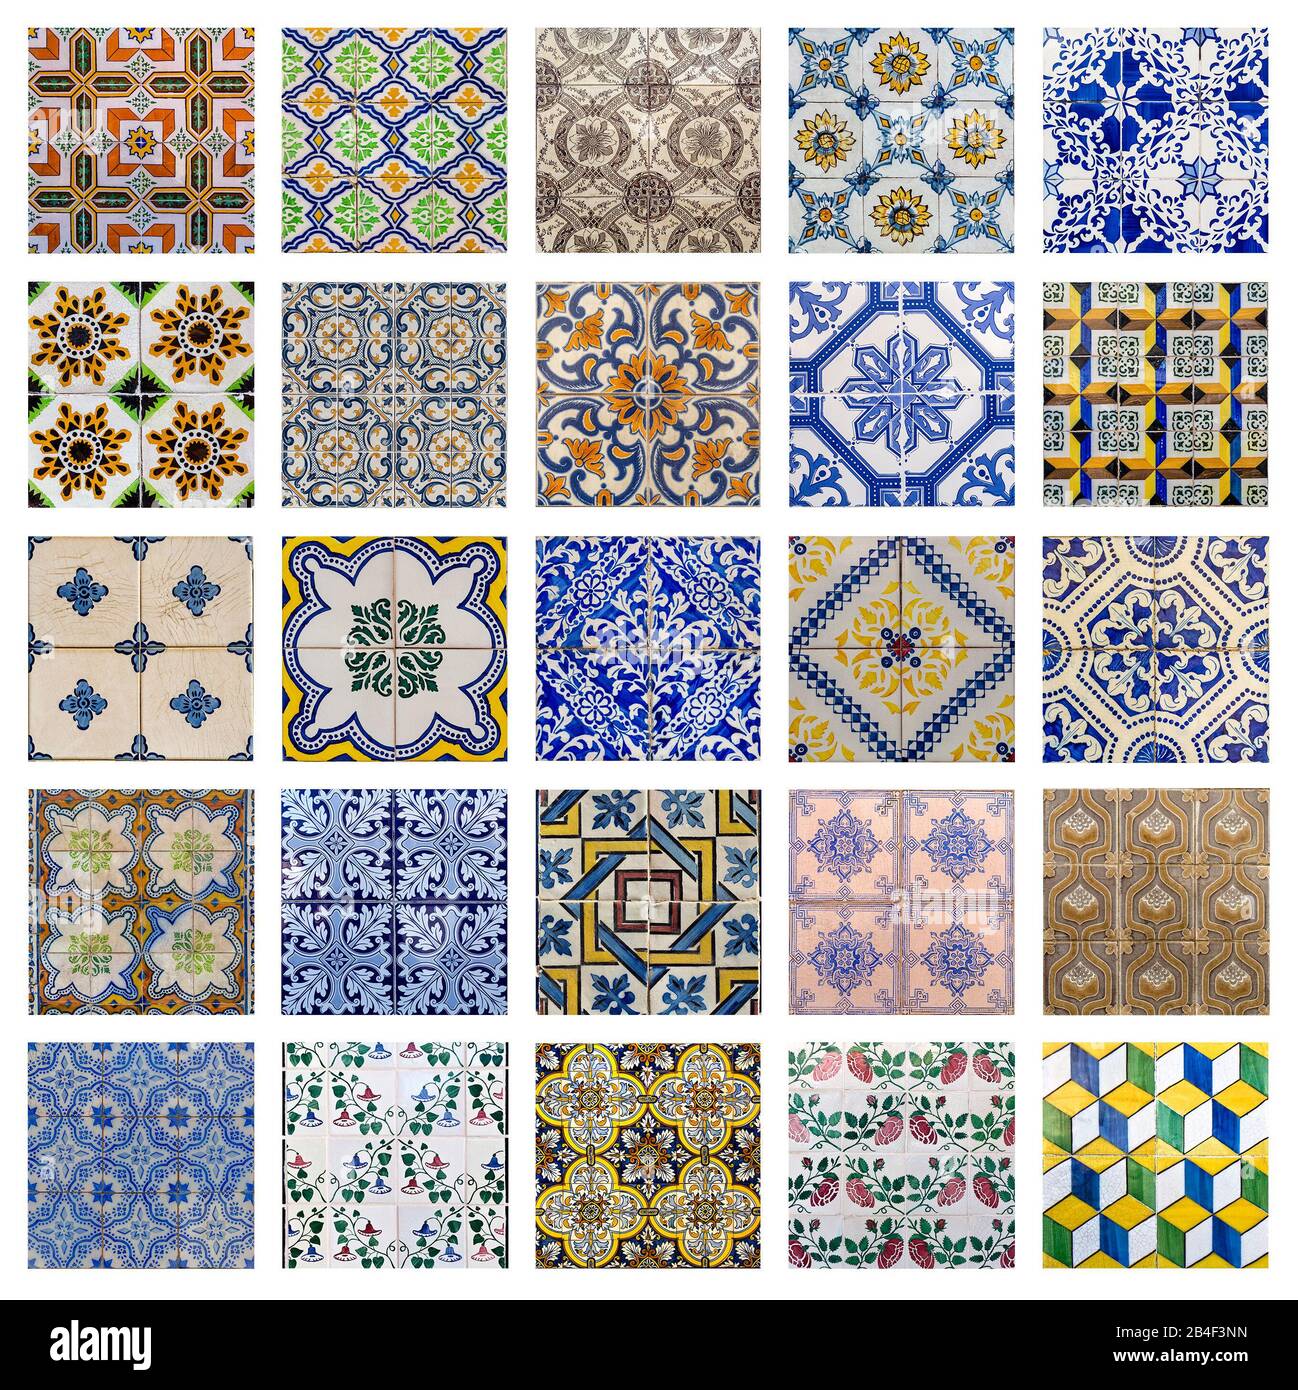 Collage showing the traditional colored decorative tiles covering the facades of many buildings in Lisbon, Portugal Stock Photo